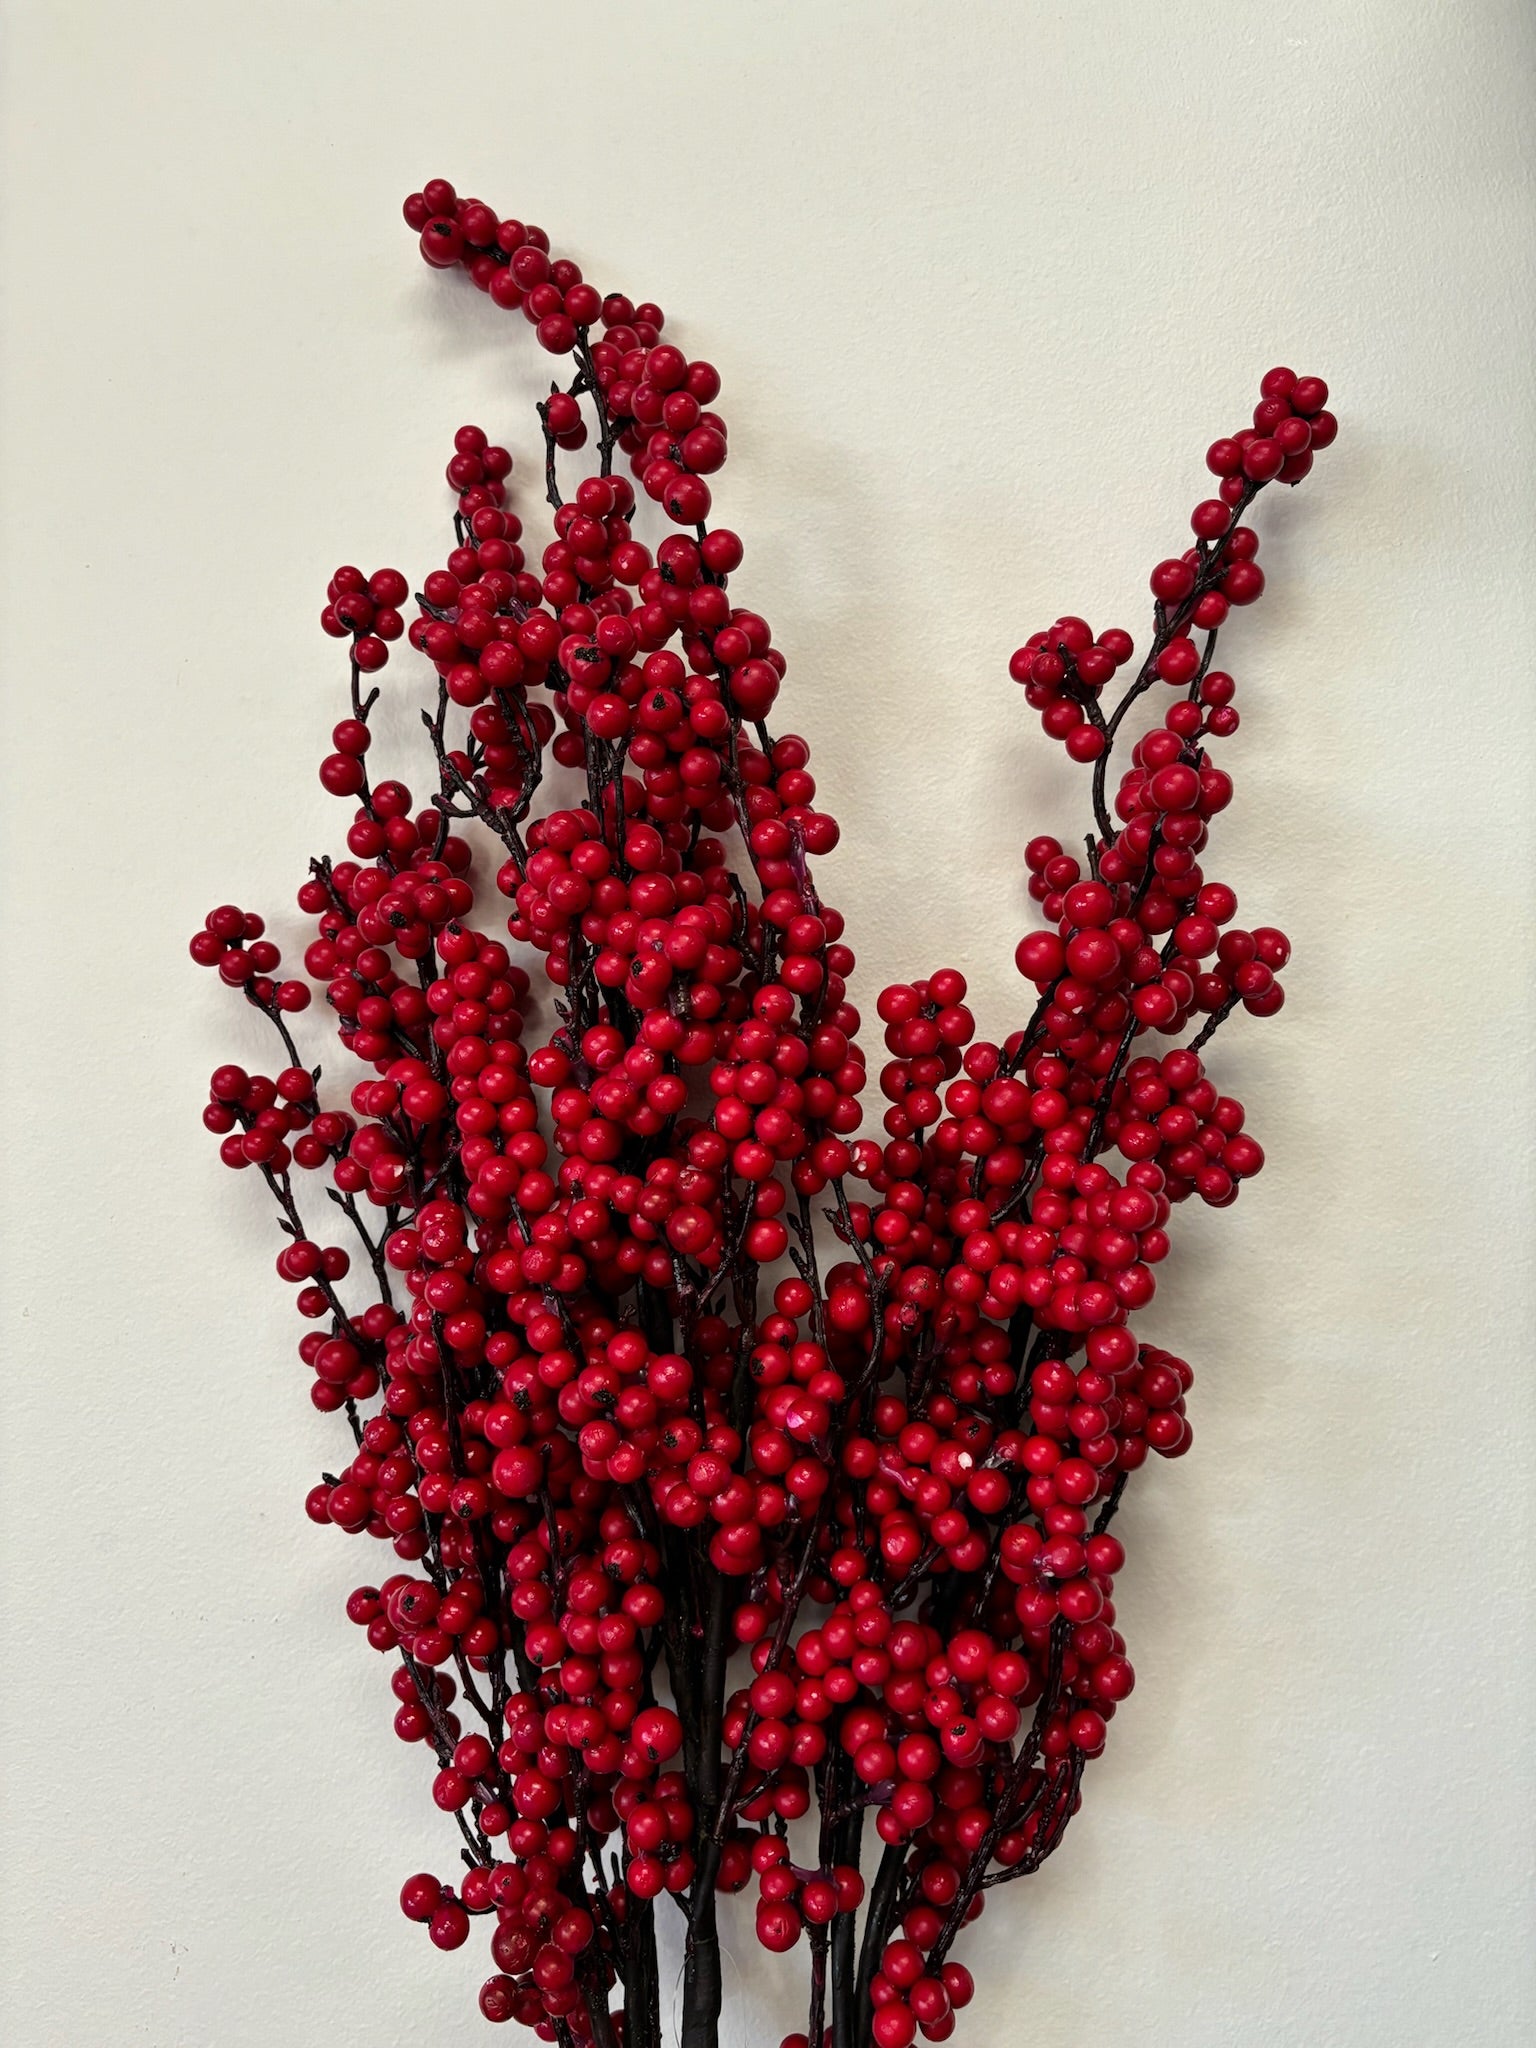 Artificial Red Berry Stems